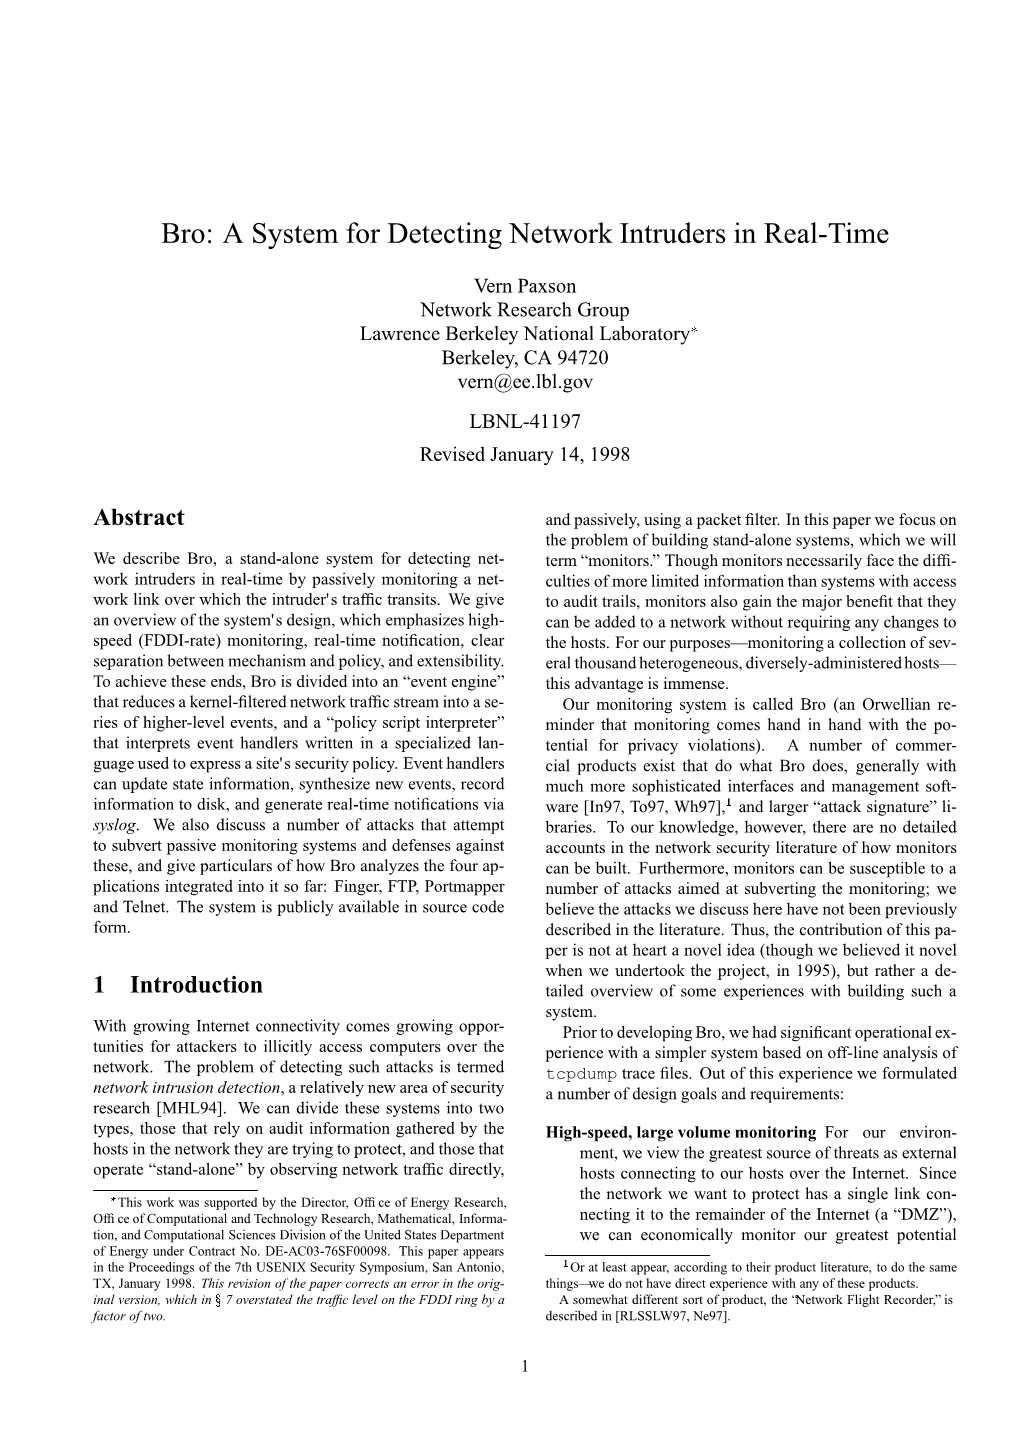 Bro: a System for Detecting Network Intruders in Real-Time